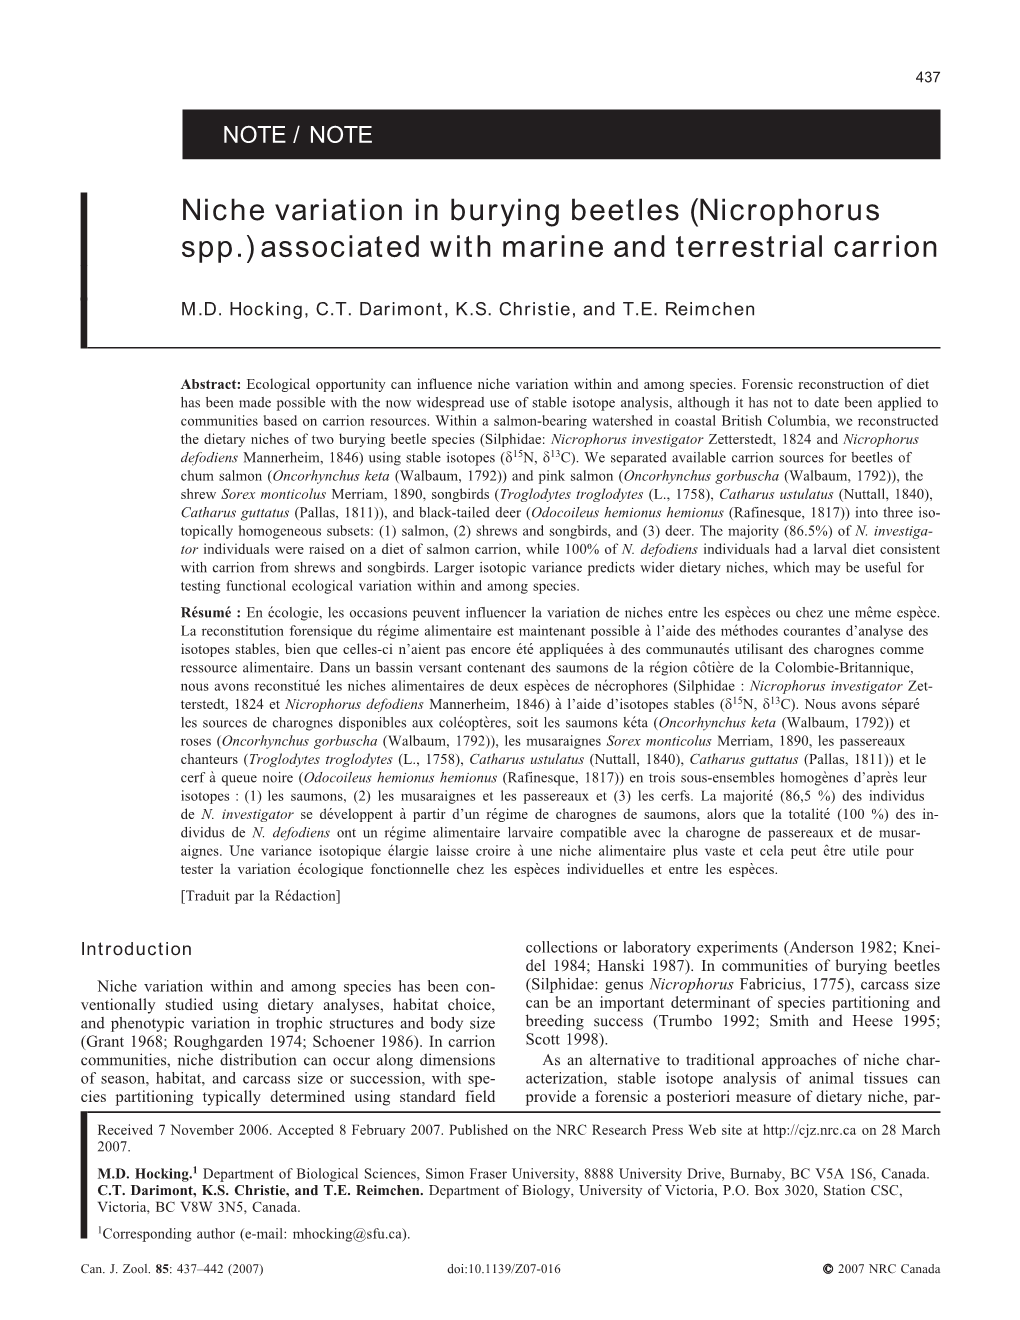 Niche Variation in Burying Beetles (Nicrophorus Spp.) Associated with Marine and Terrestrial Carrion